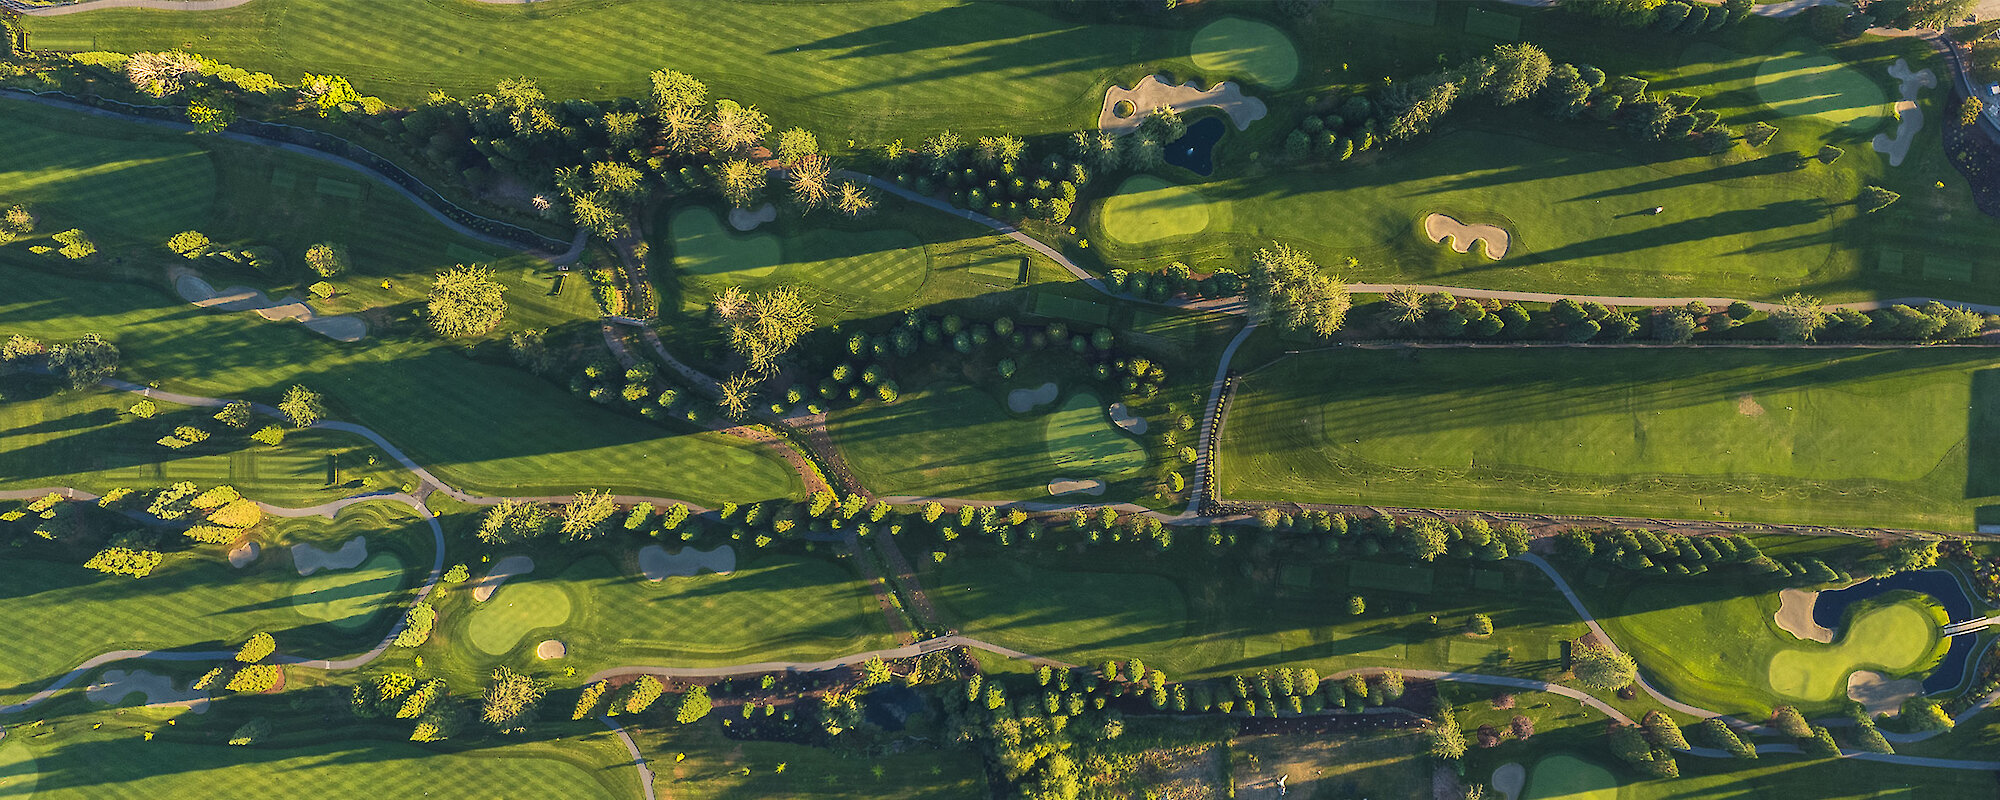 Aerial view of the golf course at sunrise